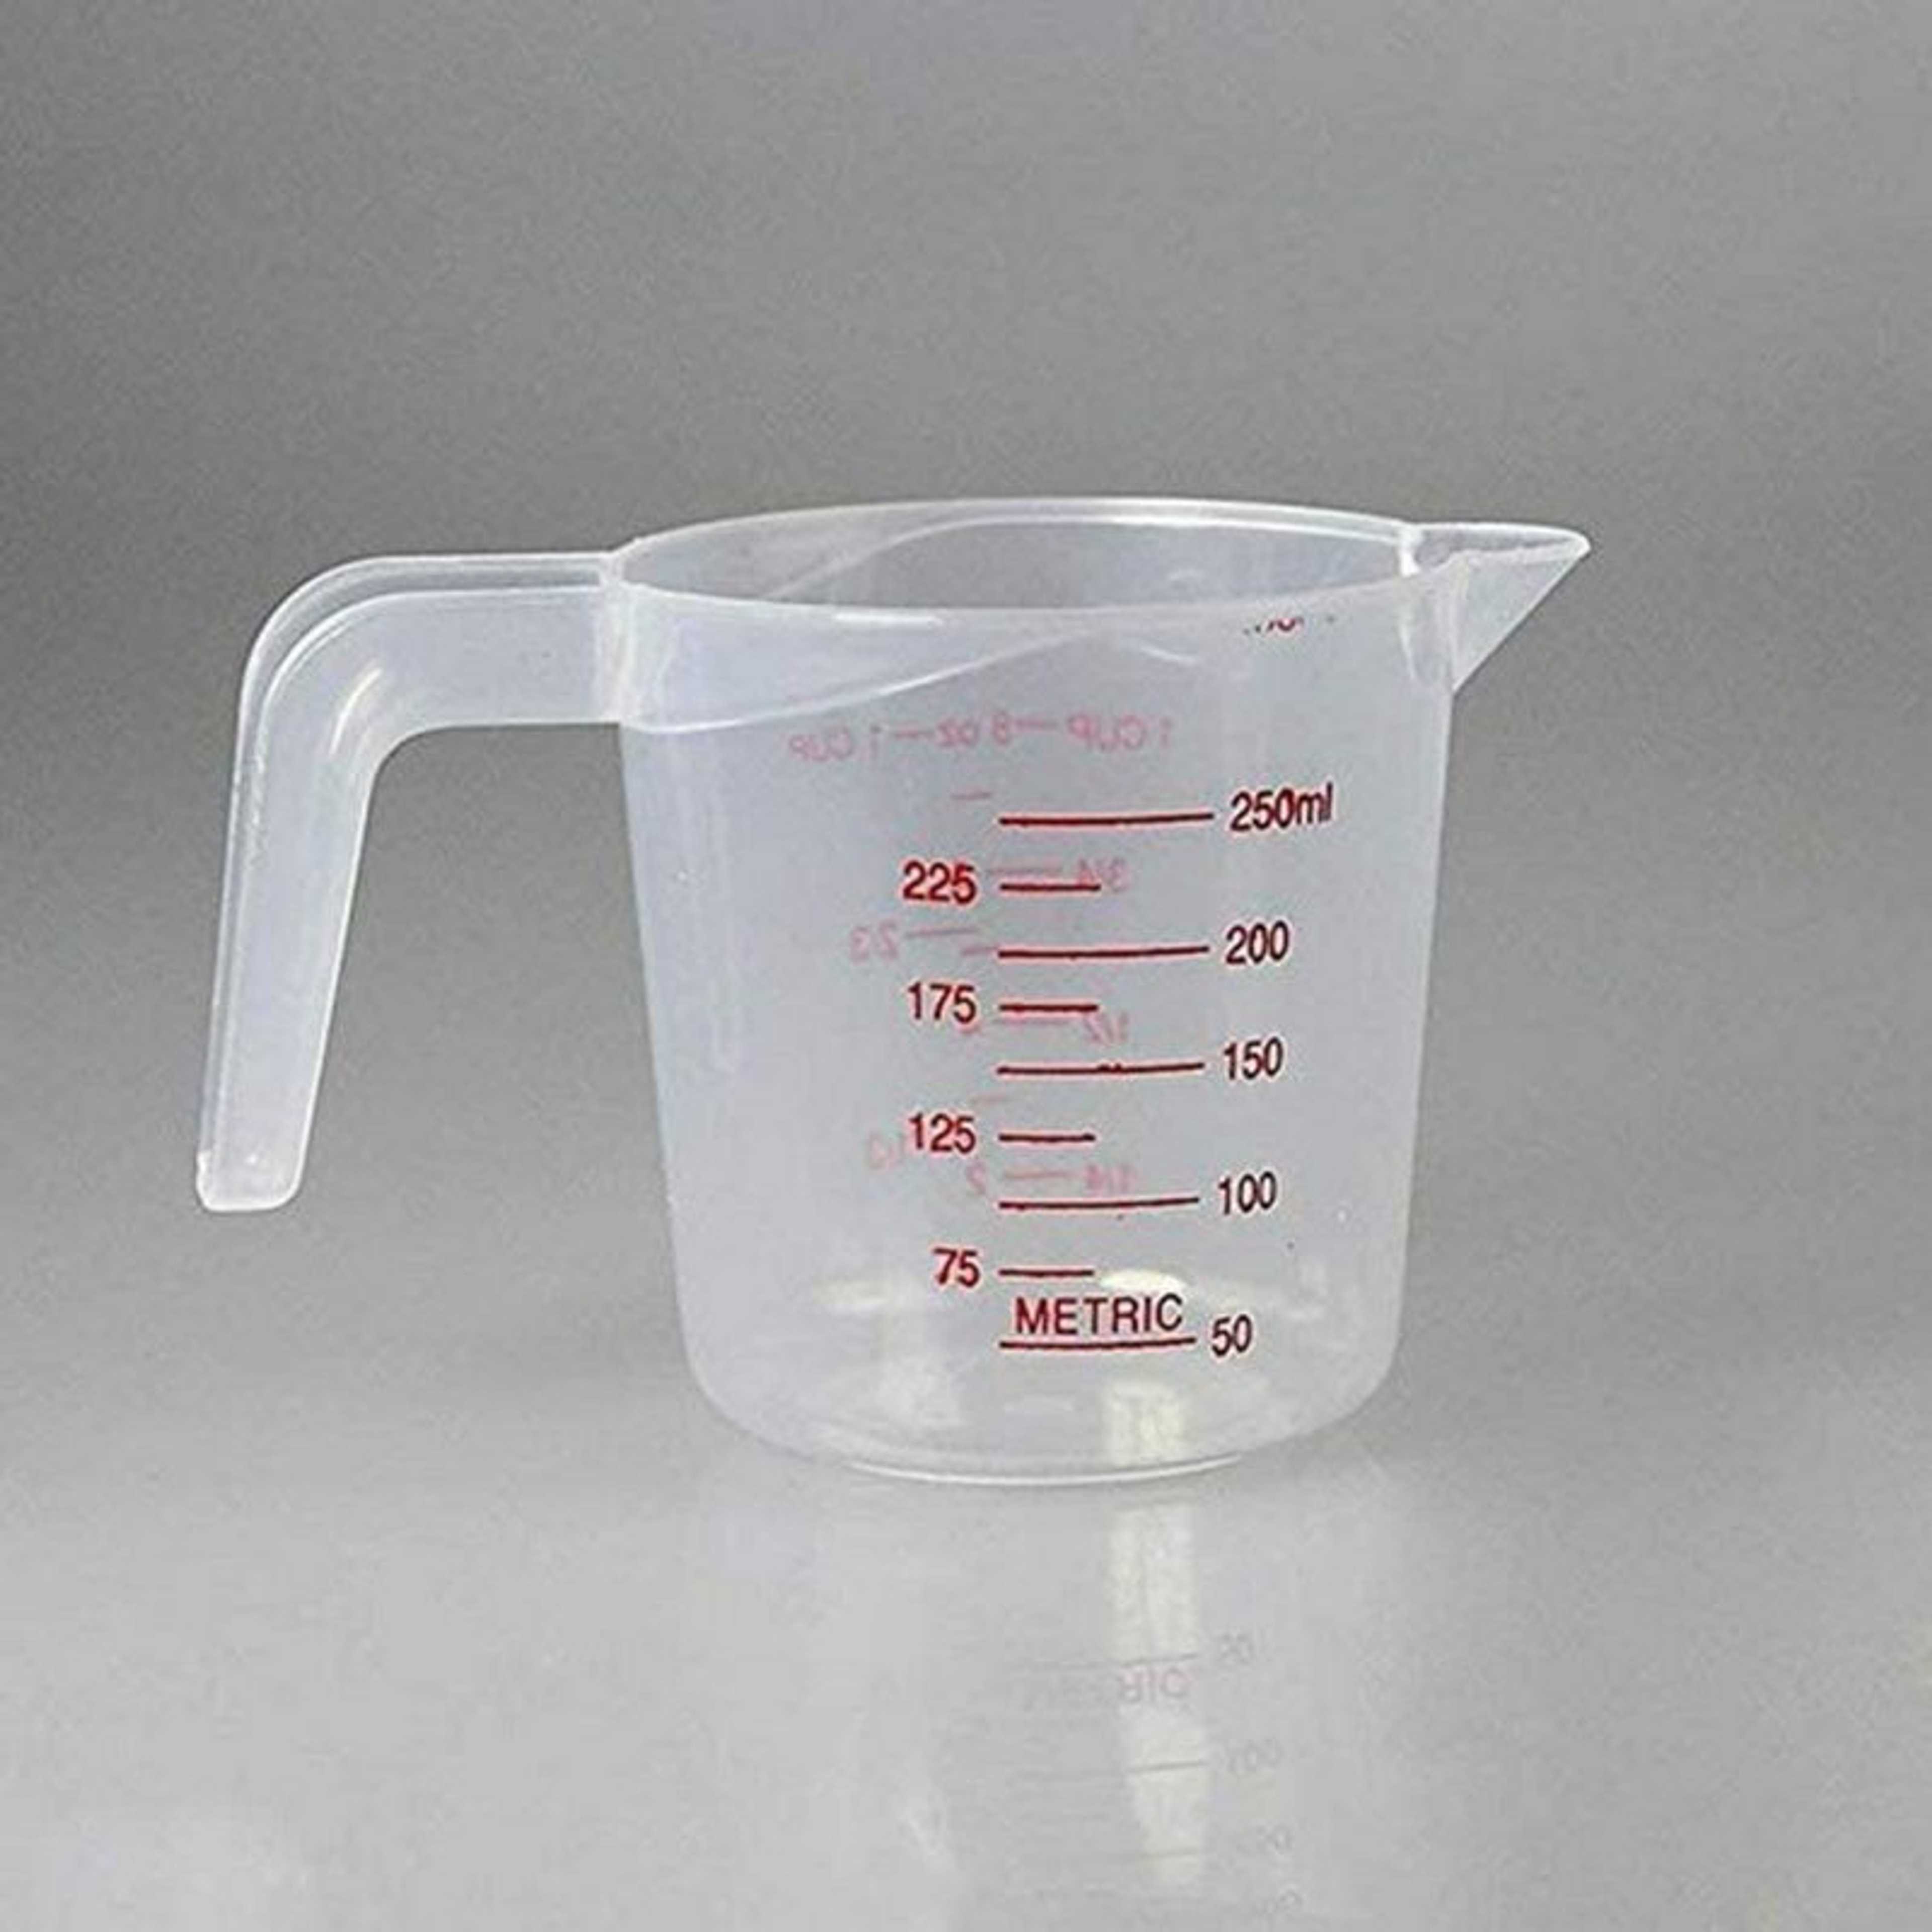 250ml Measuring Jug BPA-free Stackable Clear Heat-resistant Measuring Cup With Angled Grip and Spout For Dry Ingredients & Liquids